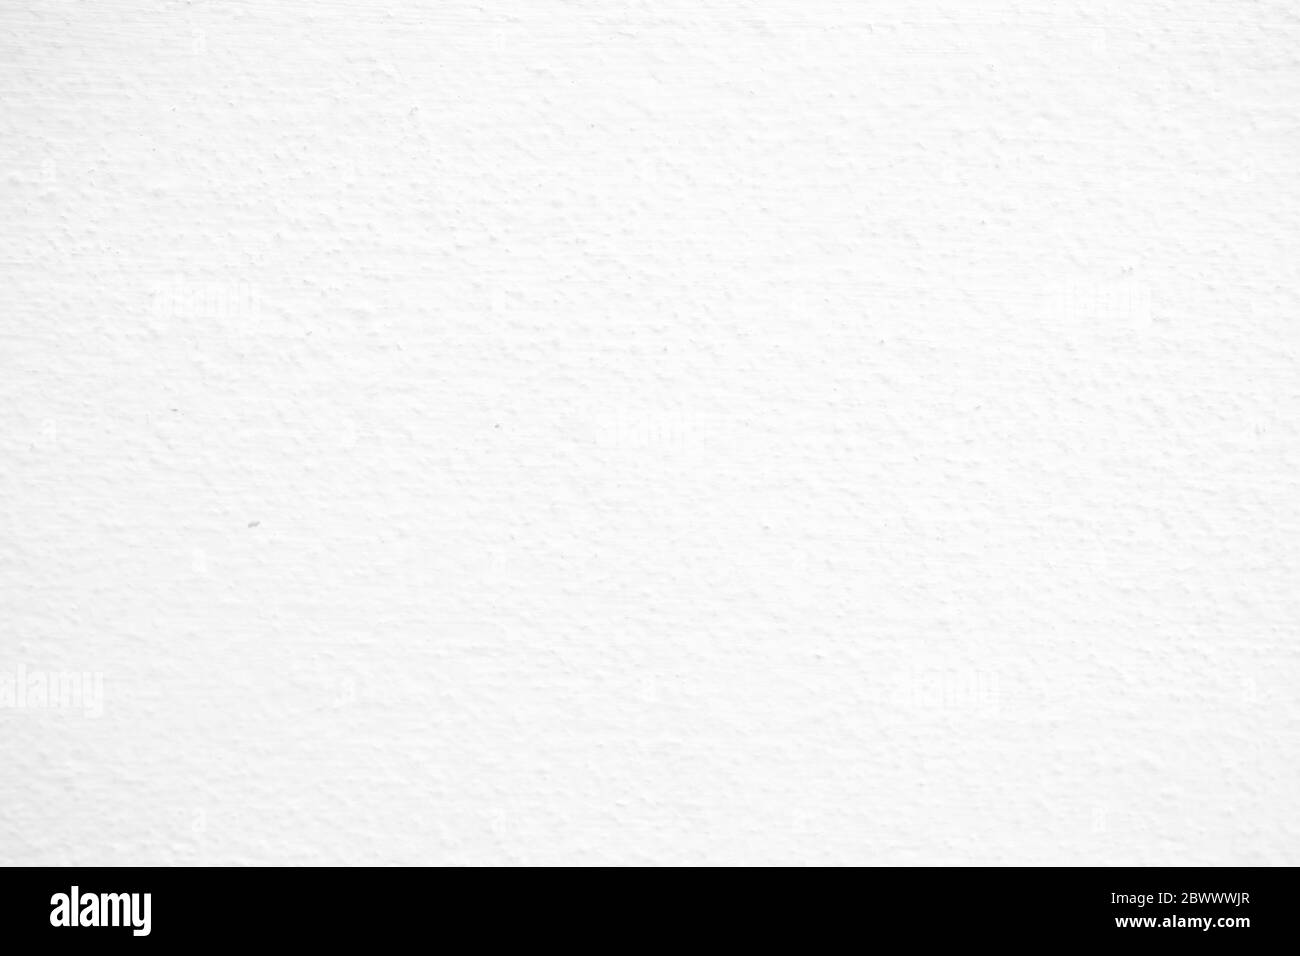 White Painting on Concrete Wall Texture Background. Stock Photo